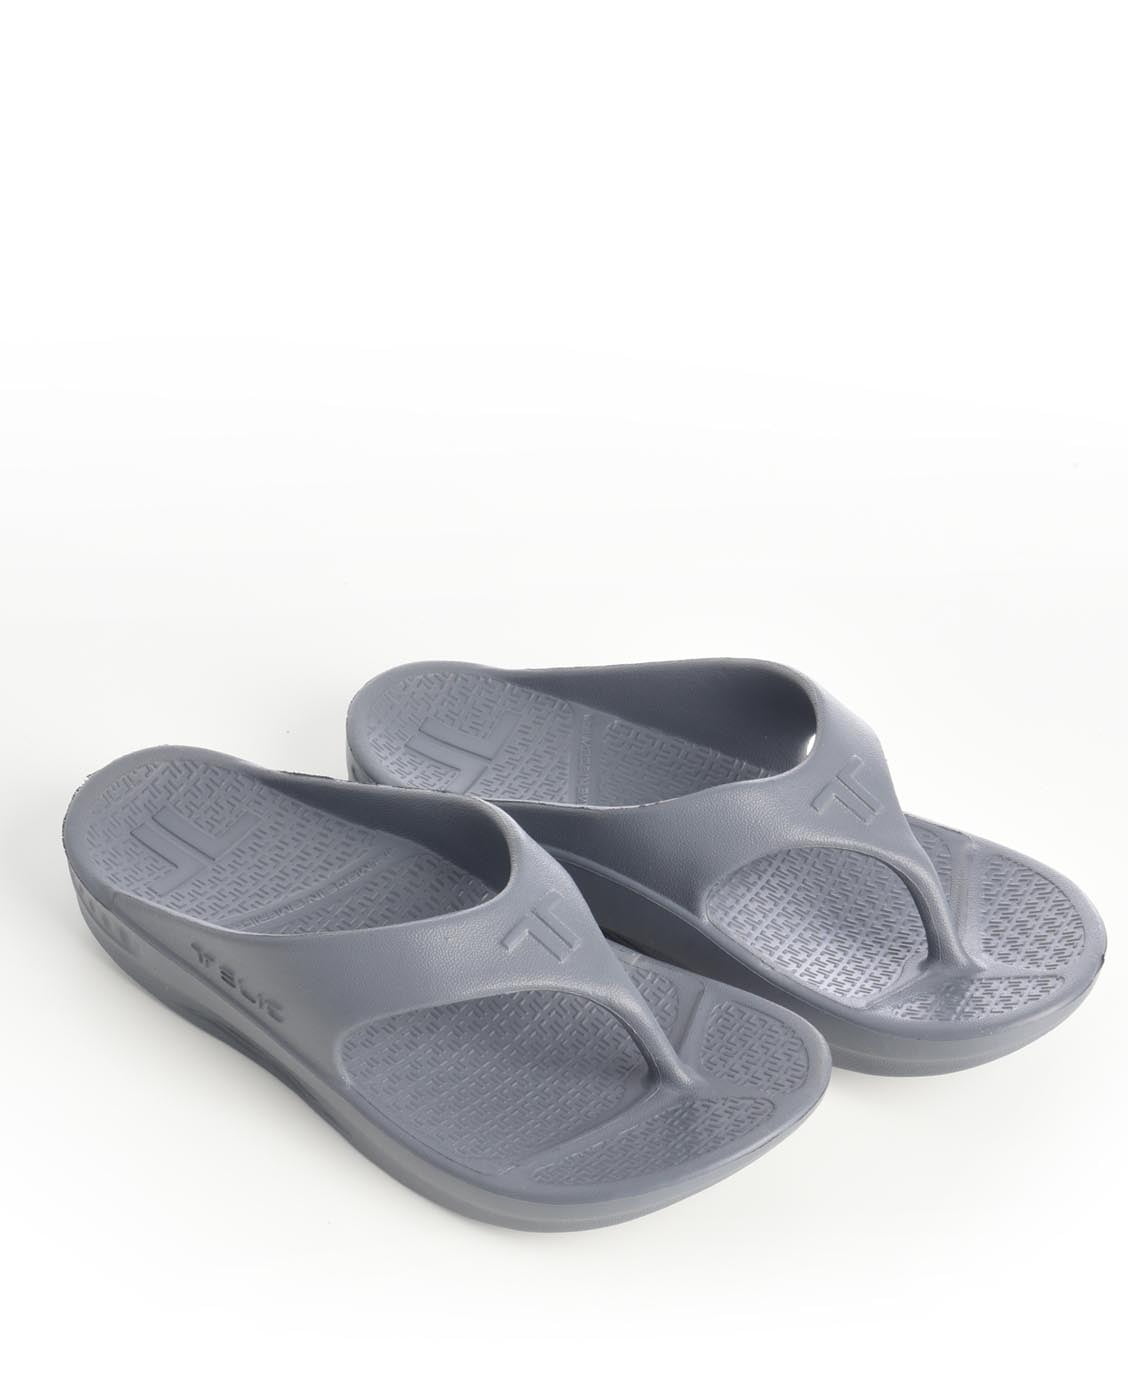 Telic Flip Flop Arch Supportive Recovery Sandal - Unisex - Gray Women's ...